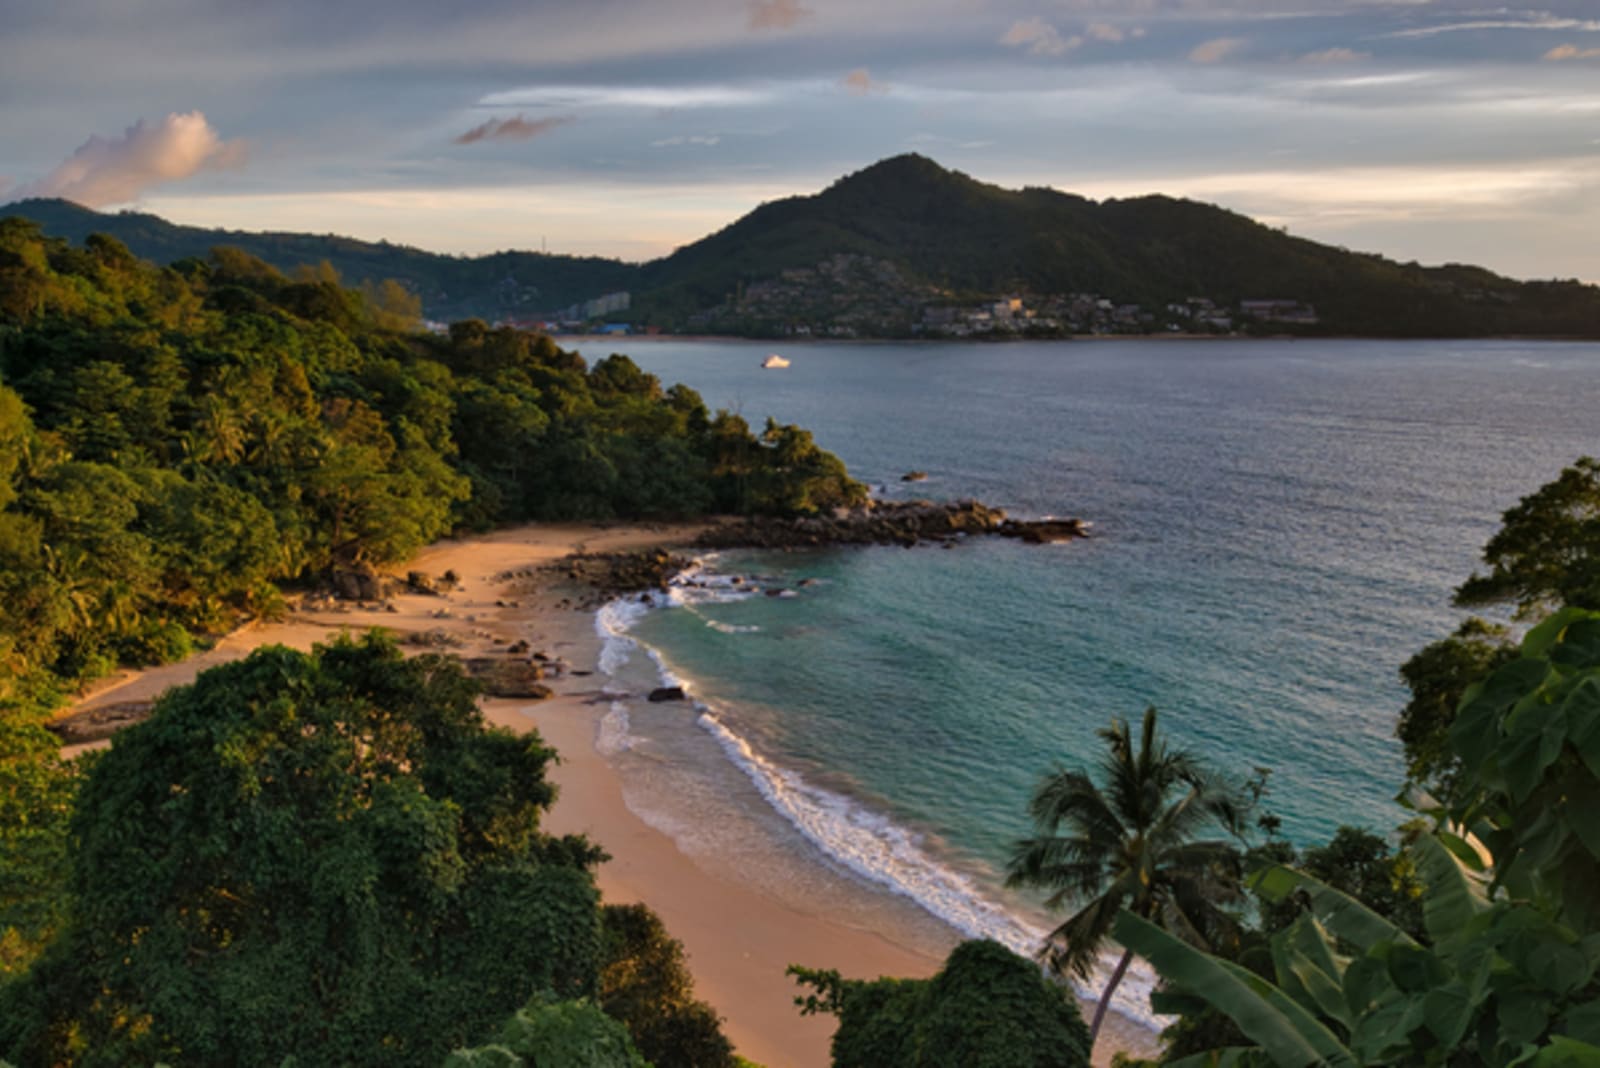 phuket beach at sunset with mountains in background